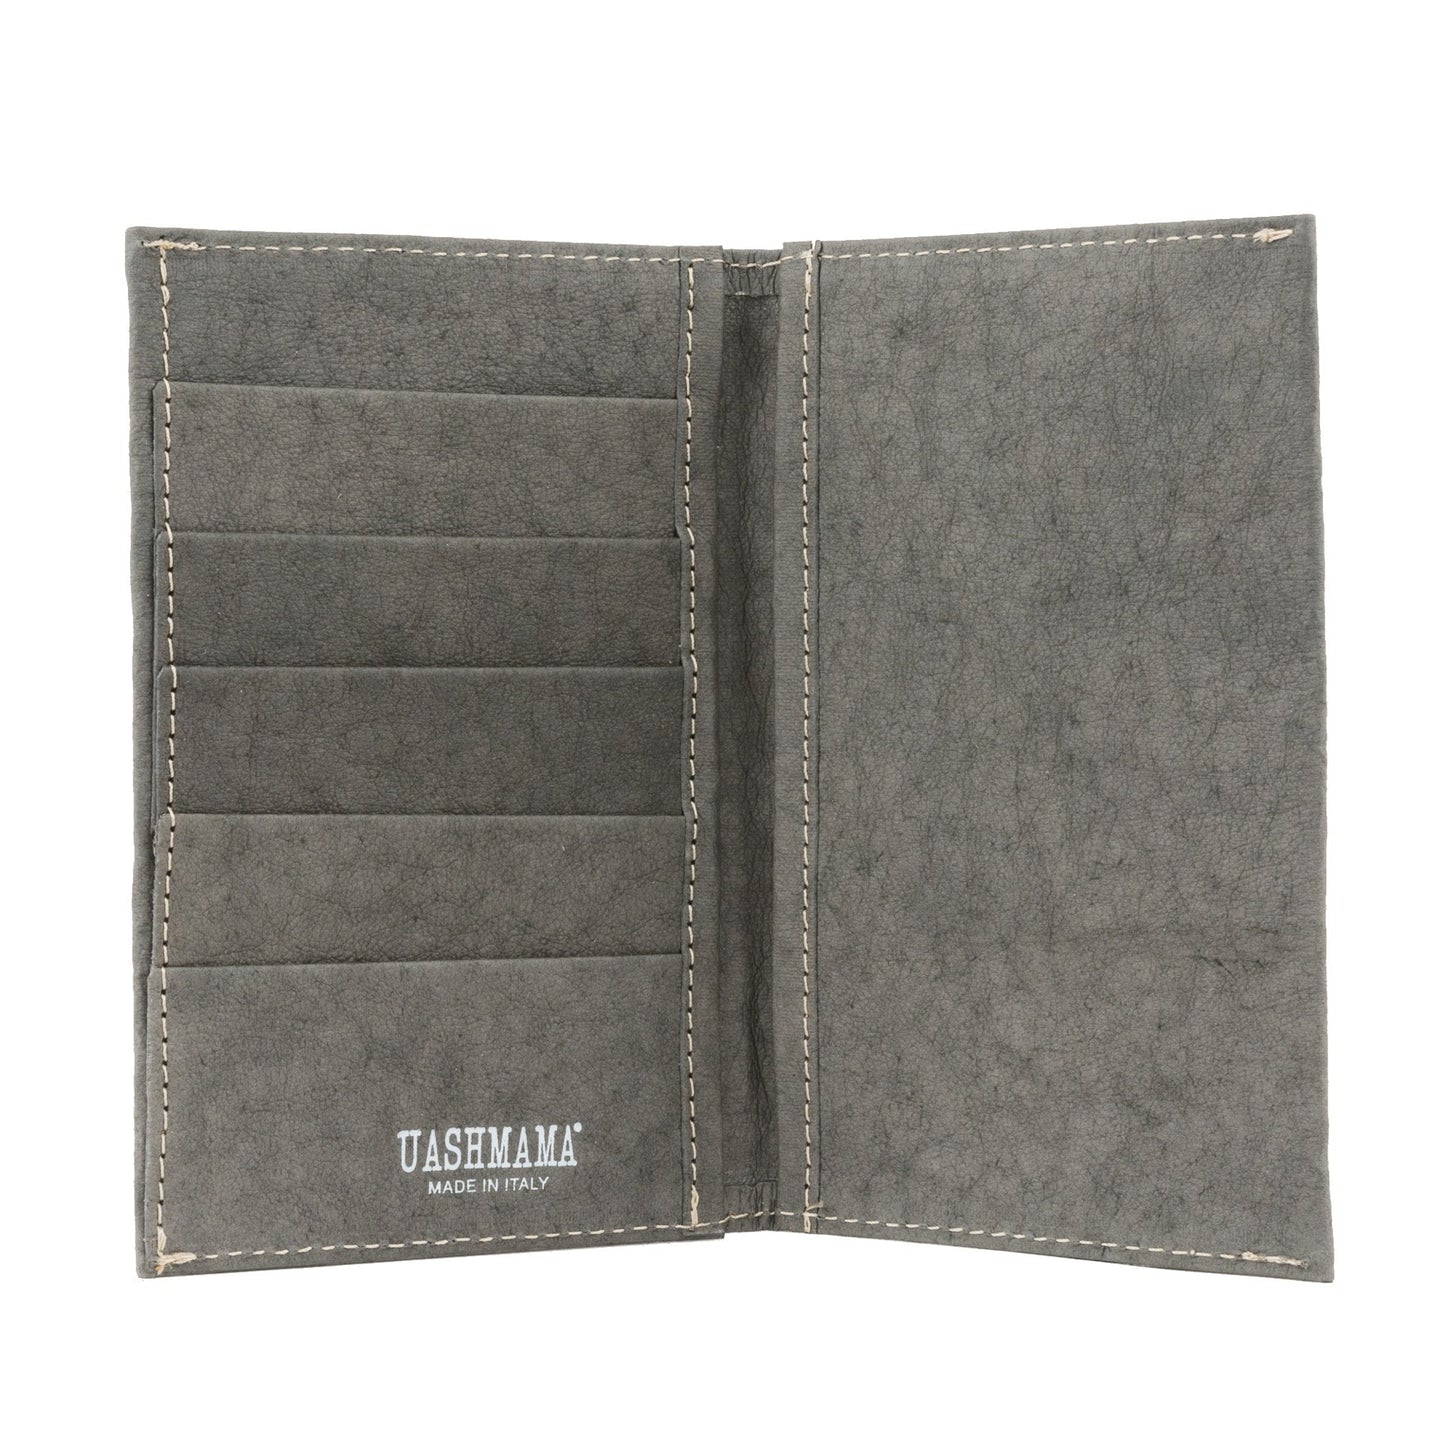 A washable paper large wallet is shown open. On the left hand side are 5 credit card slots. On the right hand side is one large pocket. The UASHMAMA logo is shown on the bottom left of the wallet. The colour of the wallet is dark grey.